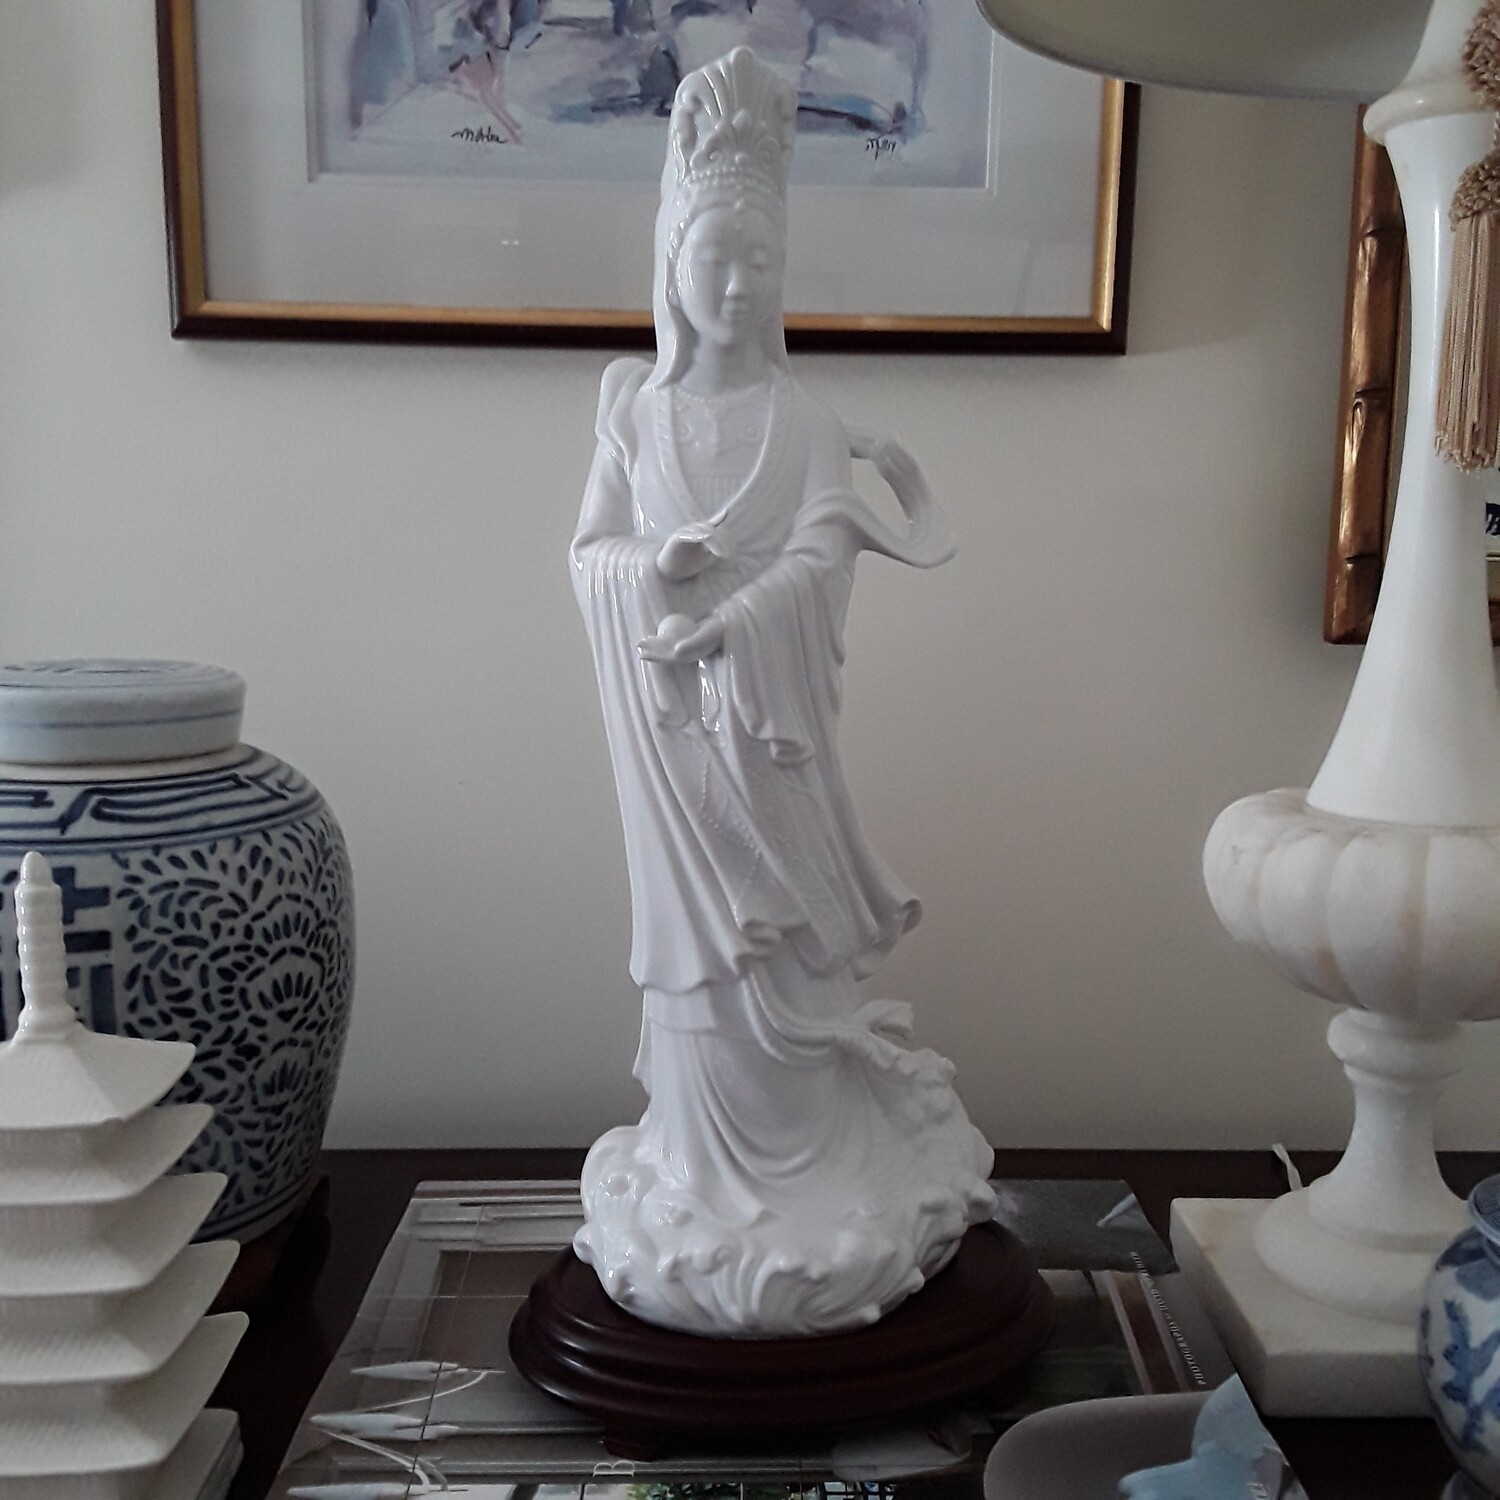 Vintage Kwan Yin Blanc de Chine Style Porcelain Statue with Wood Base